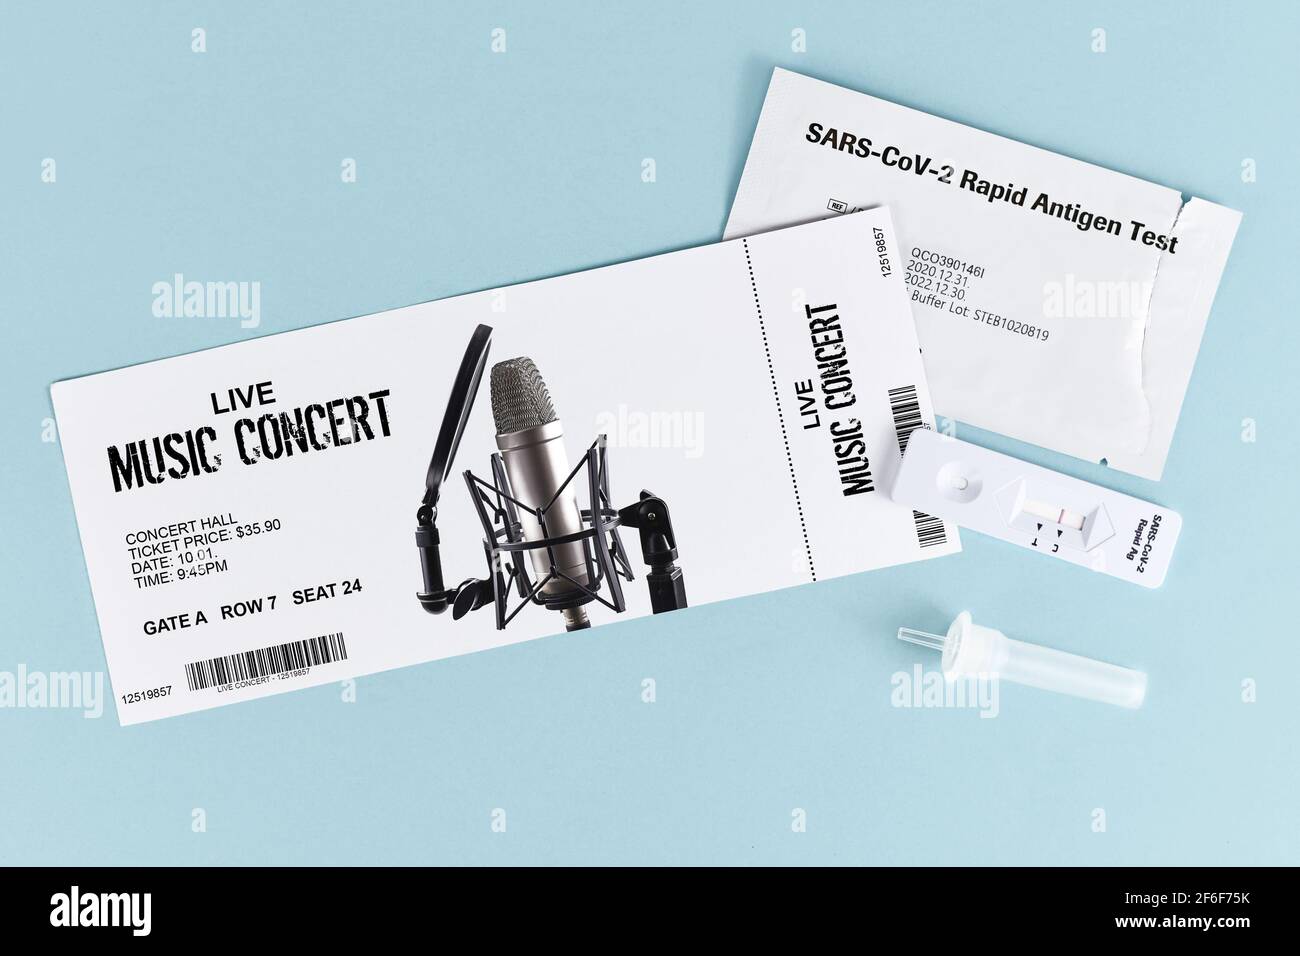 Concept for attending concerts during Corona Virus pandemic with made up ticket and SARS-CoV-2 rapid antigen test with negative result Stock Photo